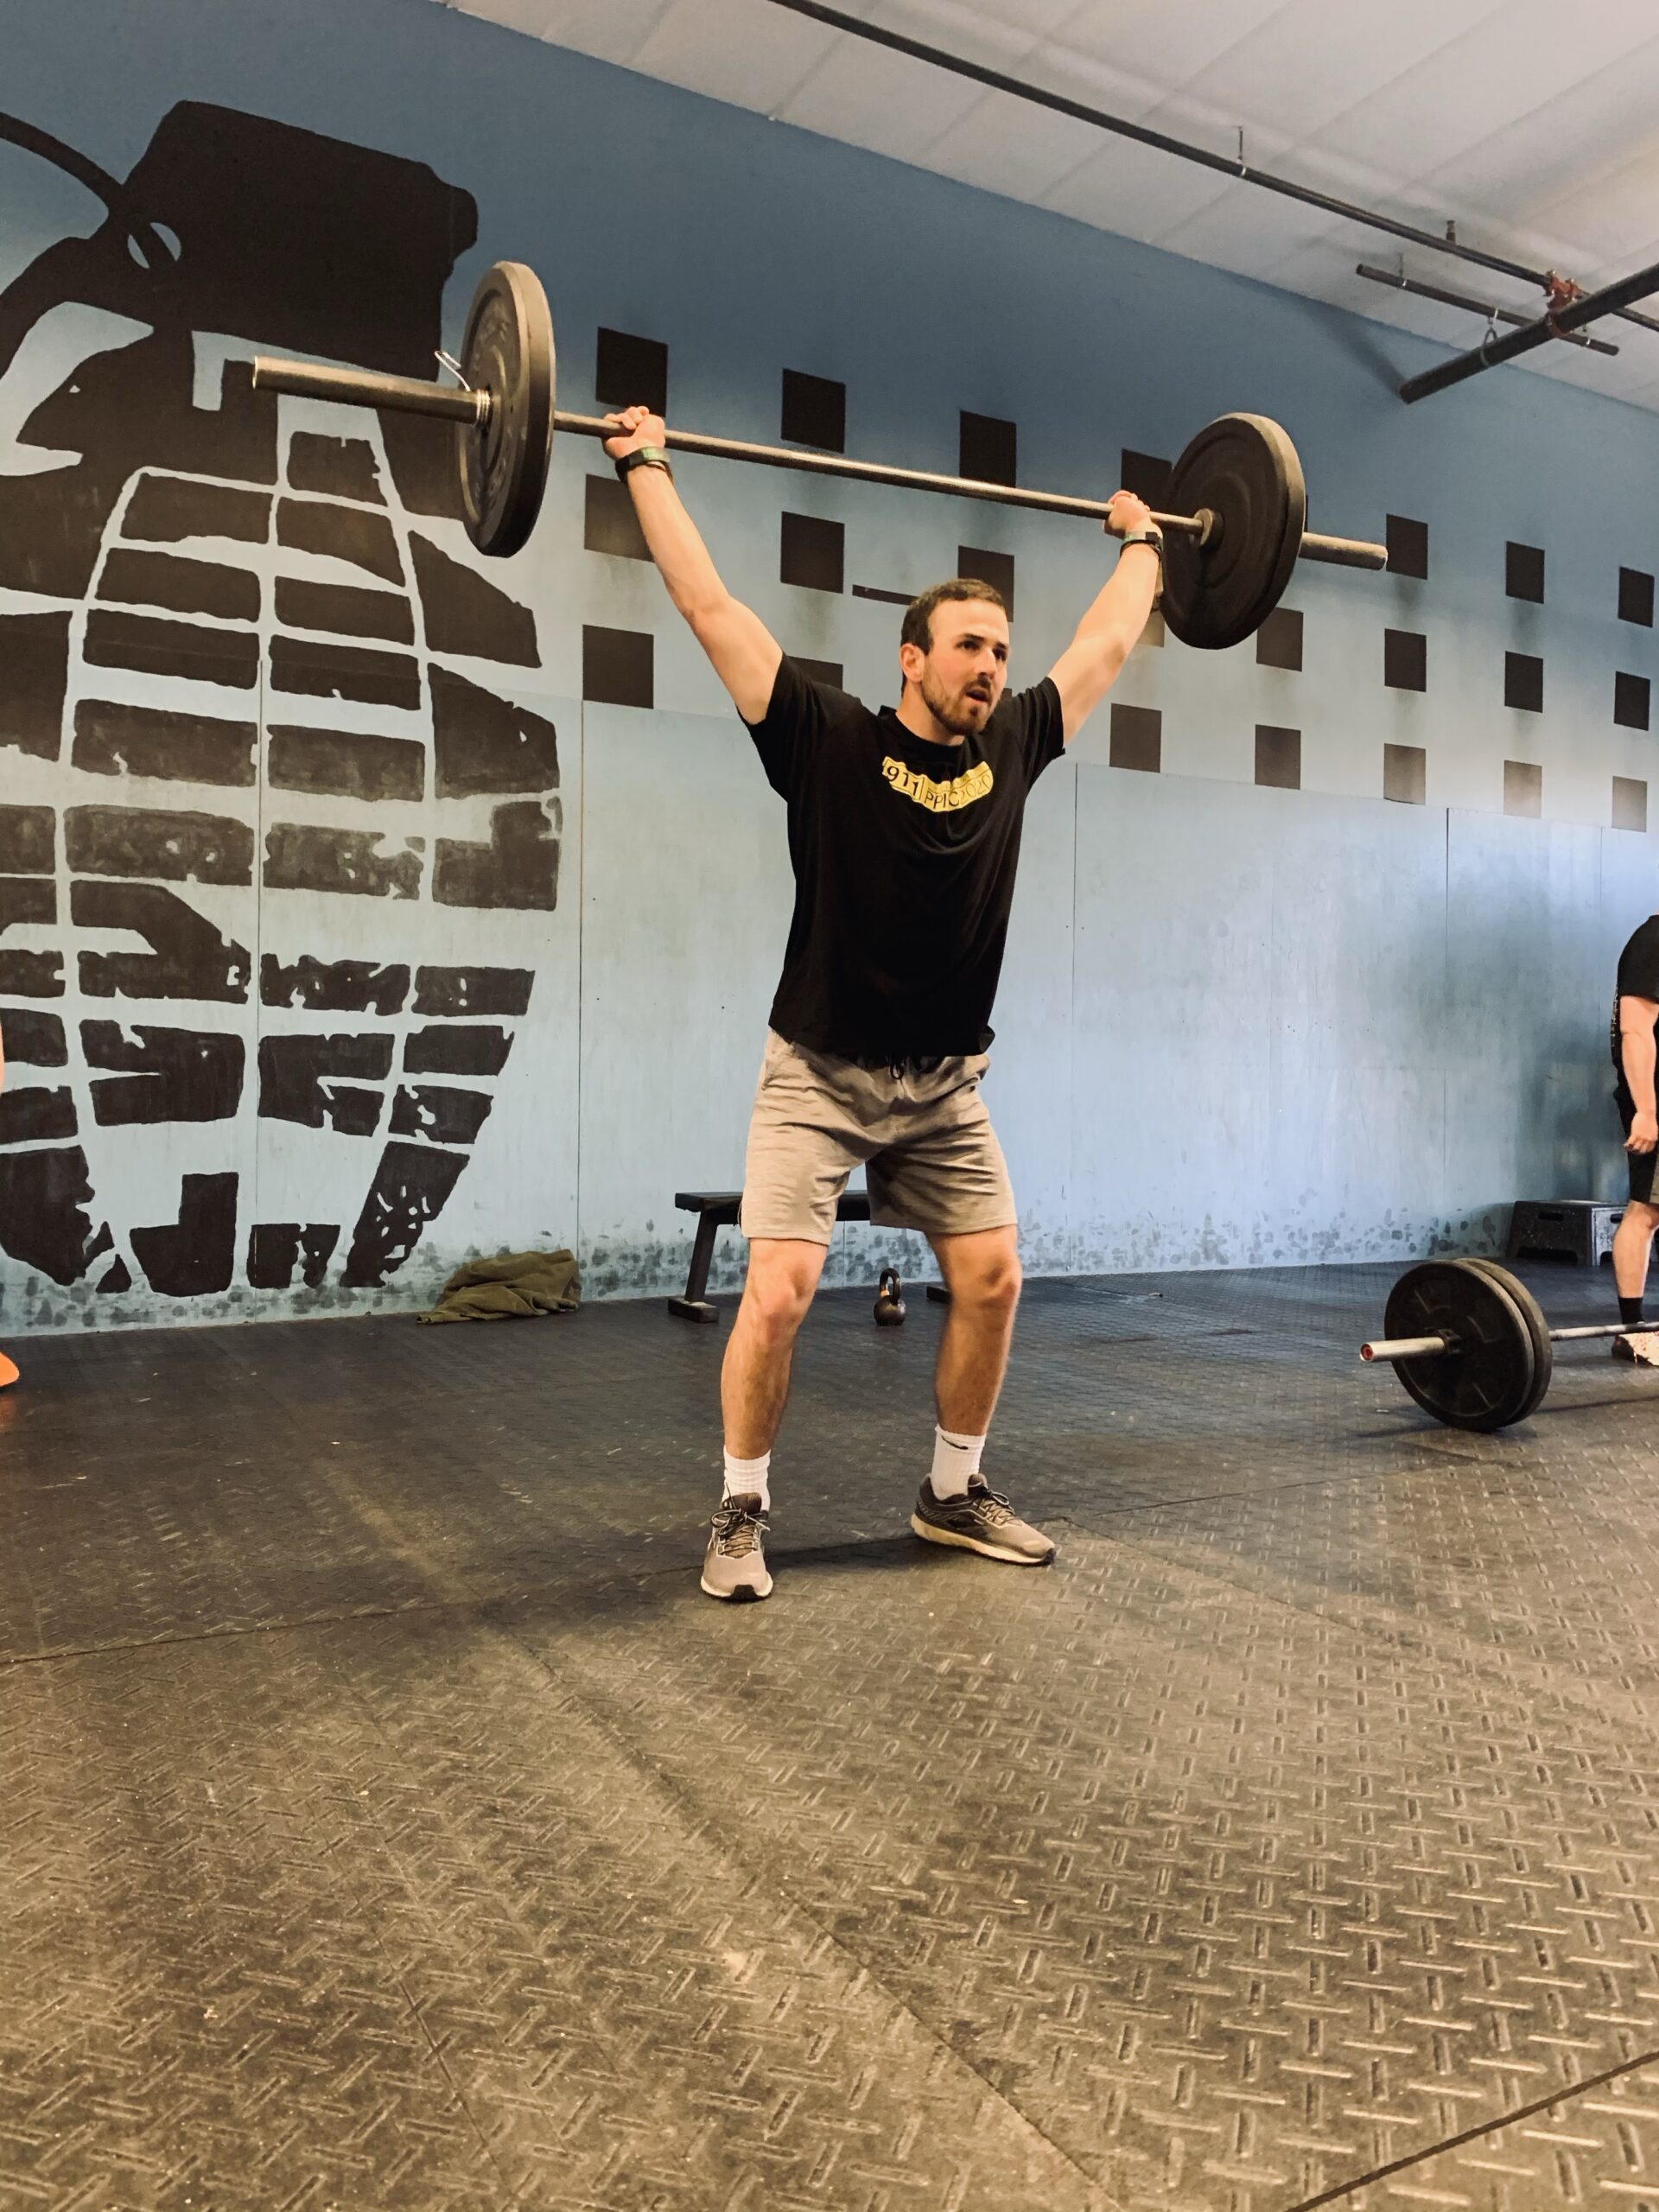 33021 Tuesday “chest Bump” Crossfit Explode